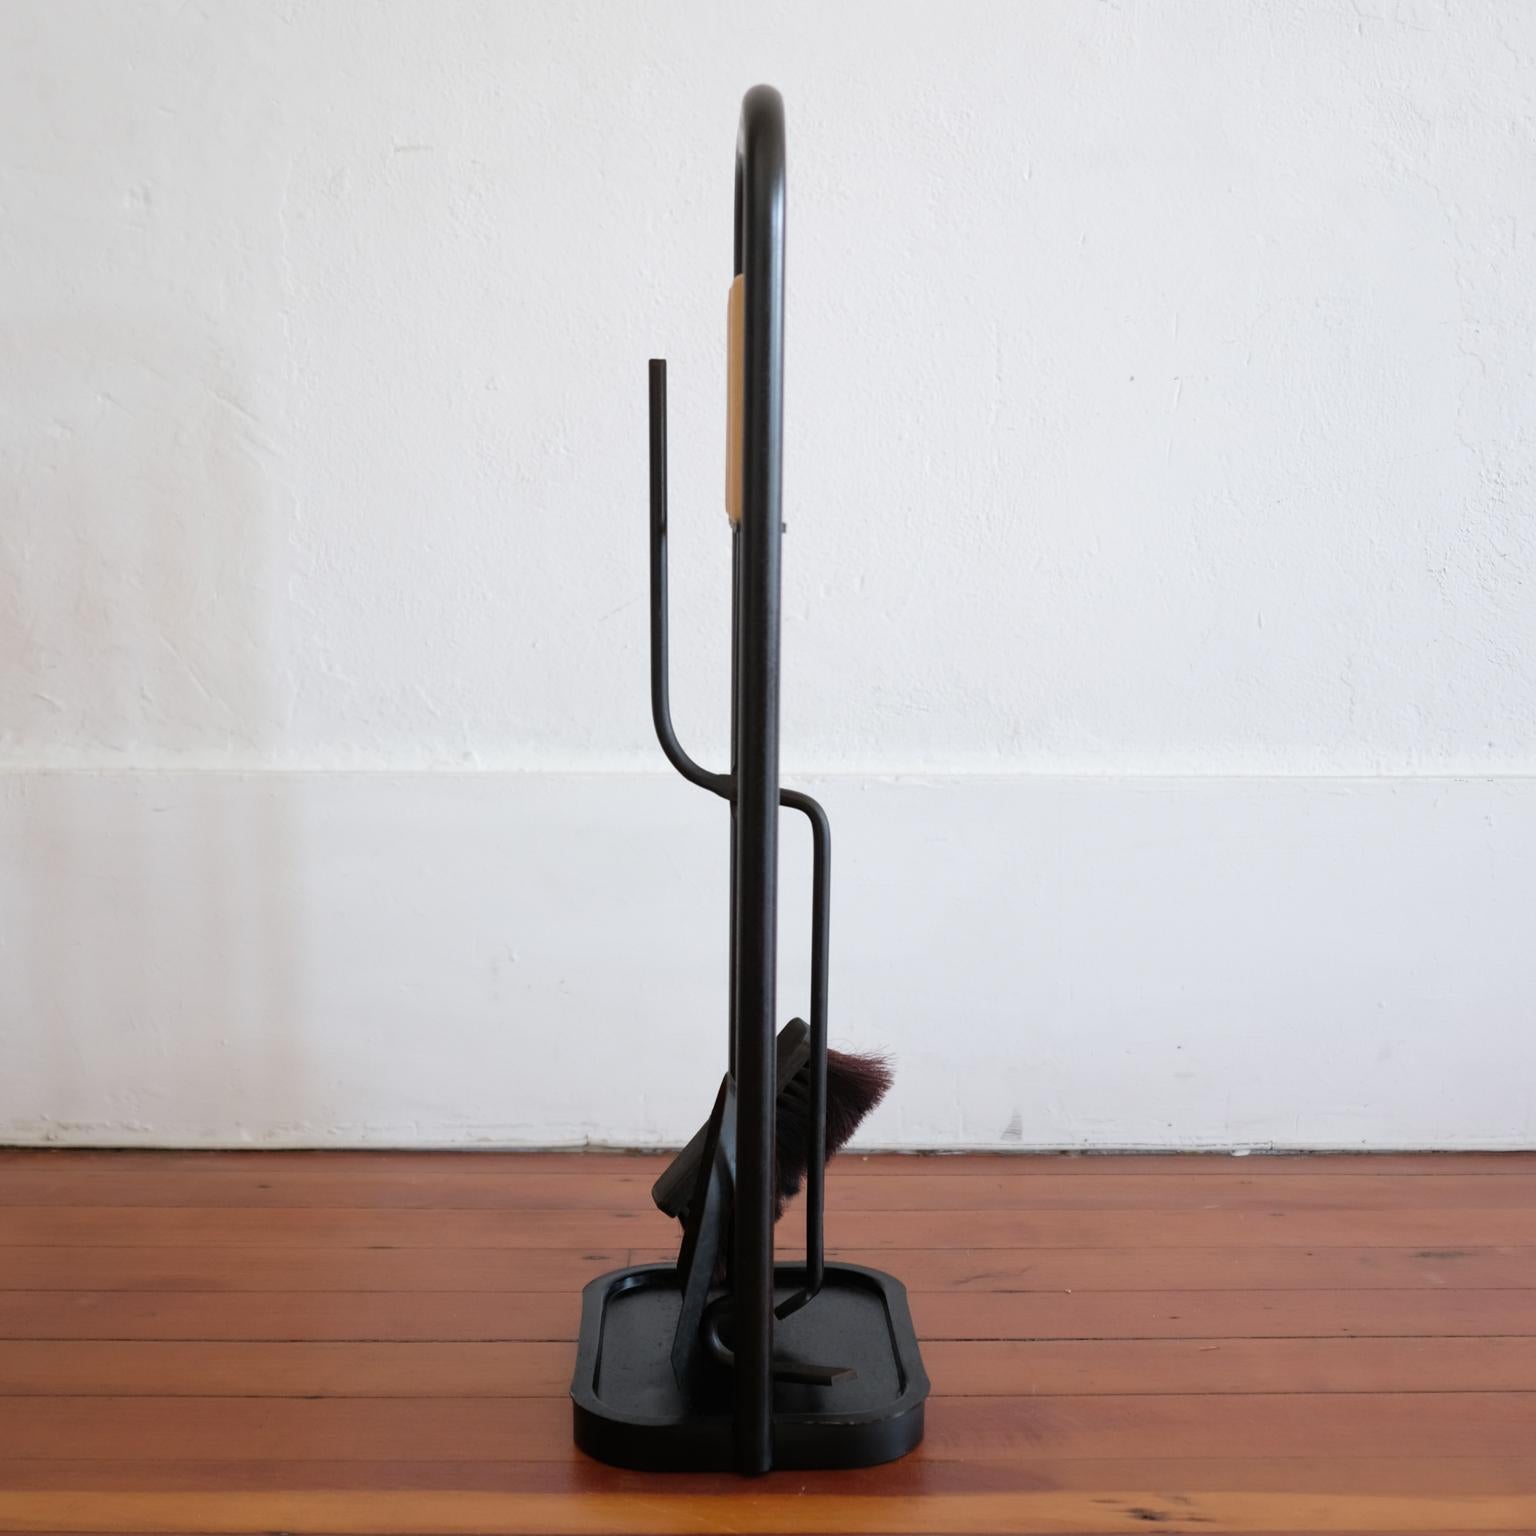 Austrian Midcentury Modernist Fireplace Tools, 1960s For Sale